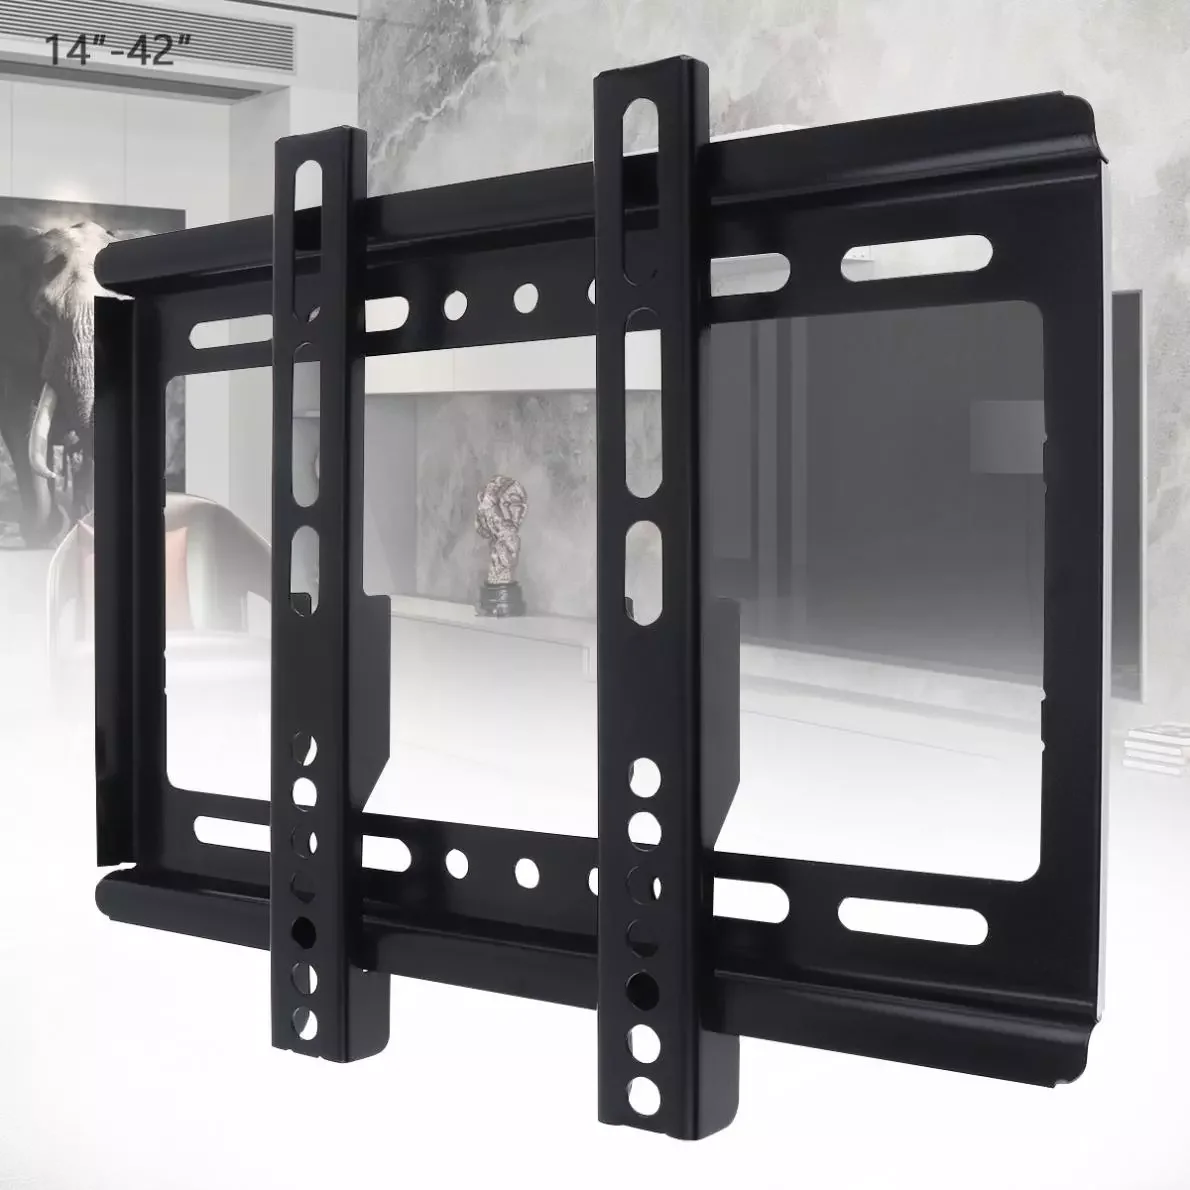 

Universal 20KG TV Wall Mount Bracket Flat Panel TV Frame Mounts with Gradienter for 14 - 42 Inch LCD LED Monitor Flat Panel